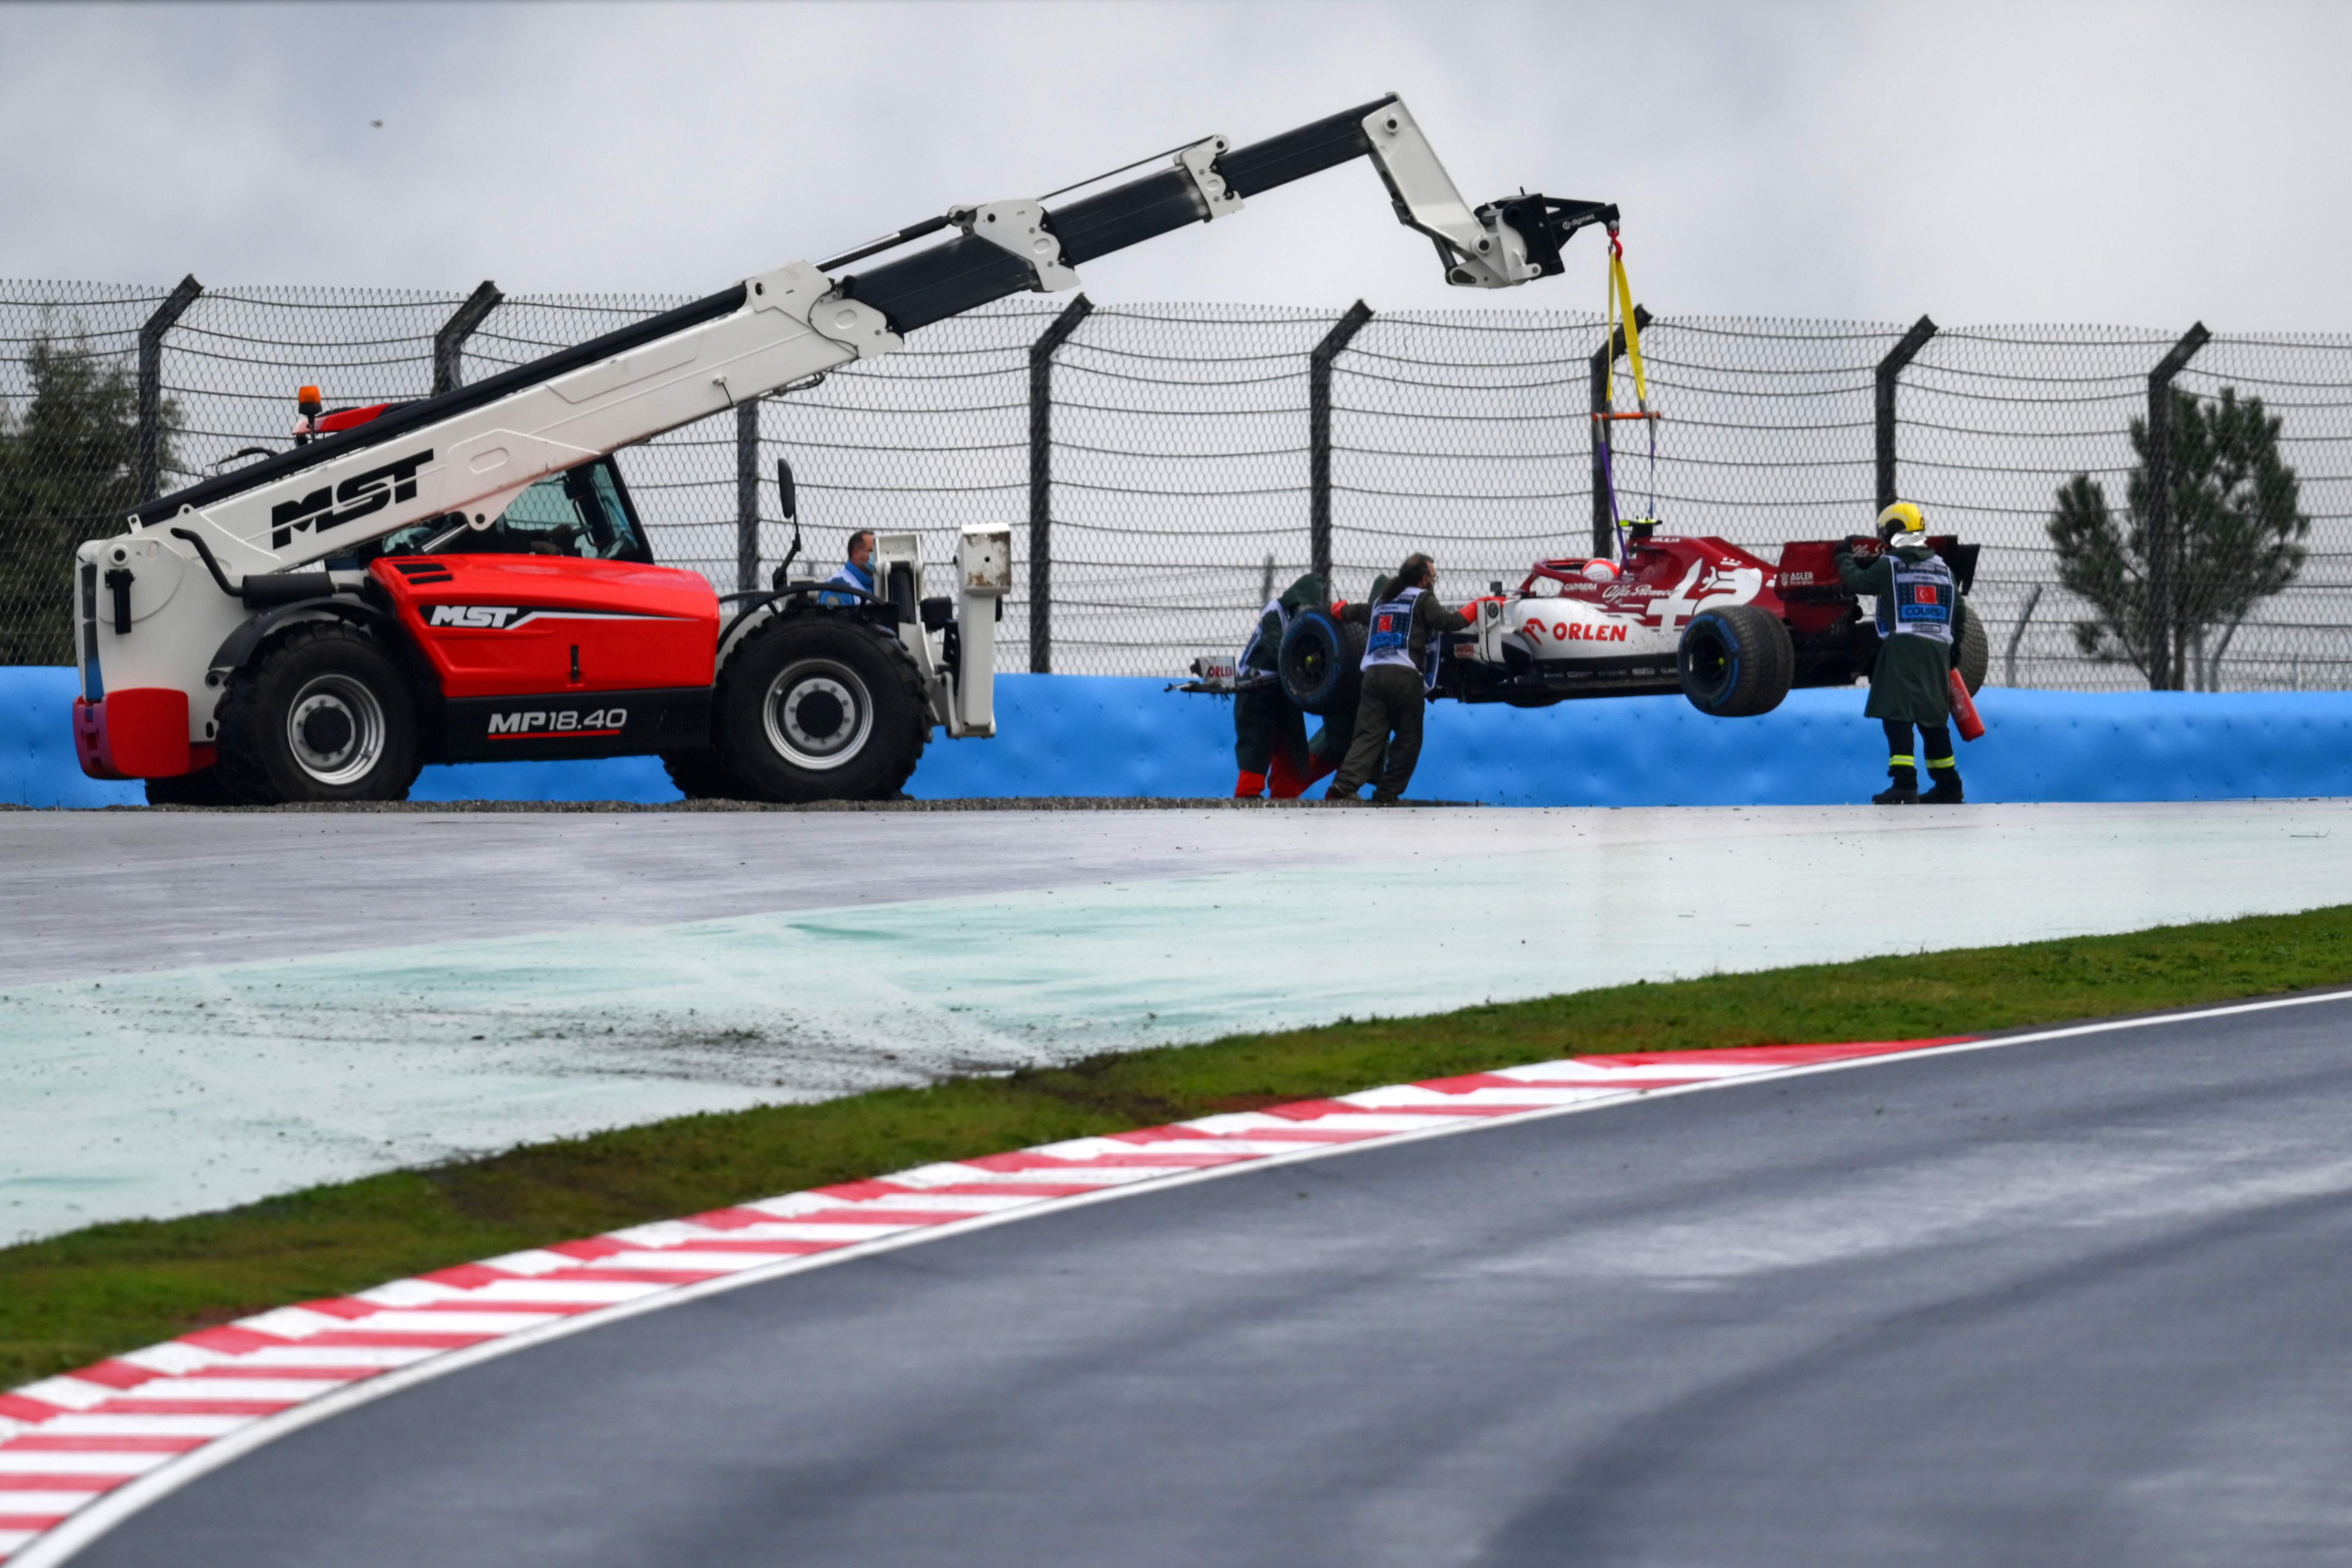 Antonio Giovinazzi is winched out of the gravel after crashing on his way to the grid